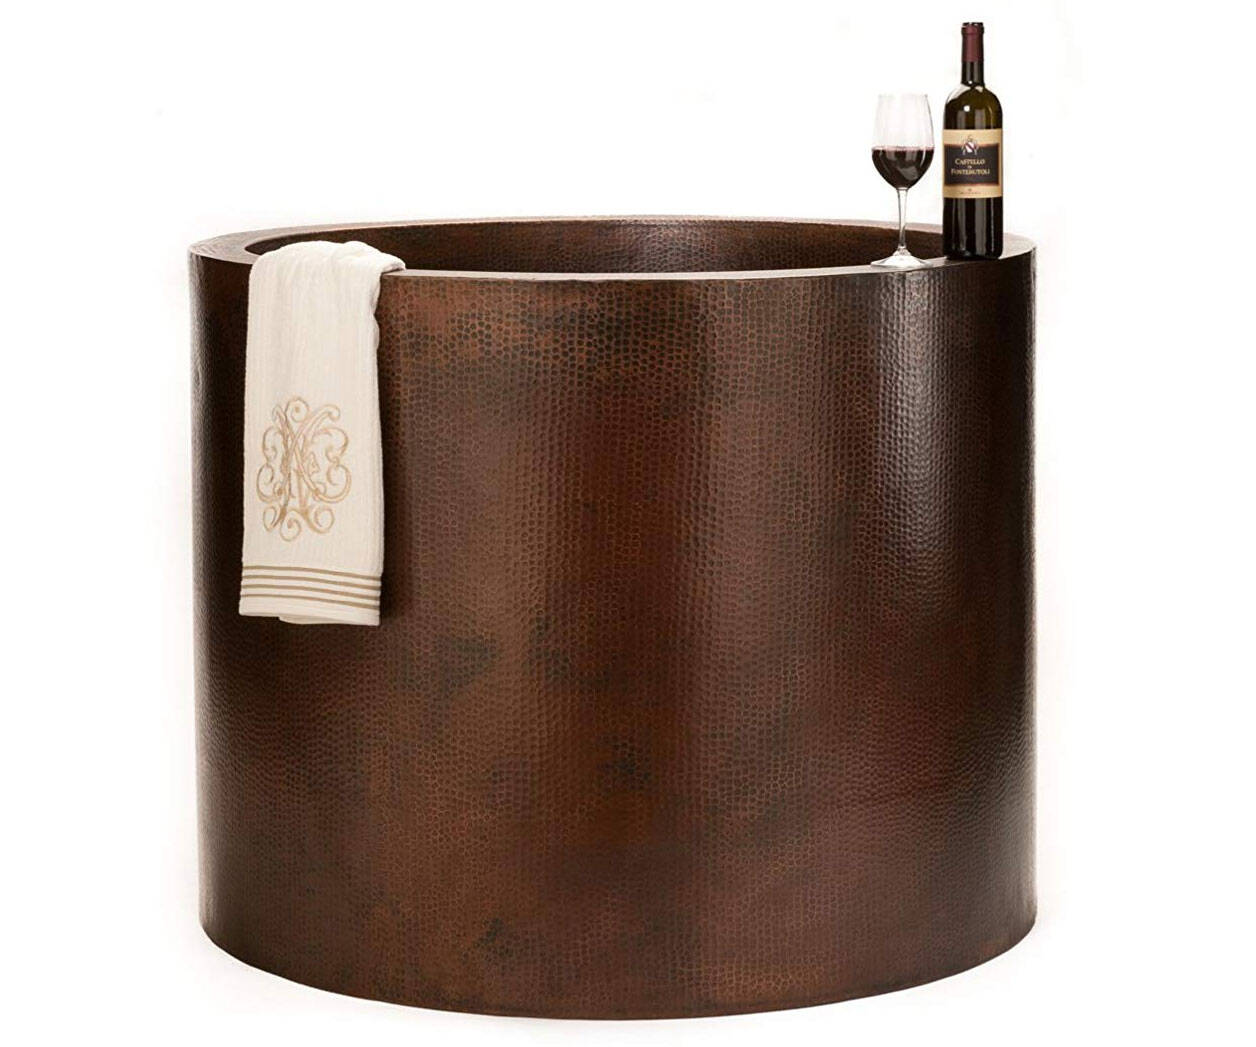 Hammered Copper Soaking Tub - coolthings.us